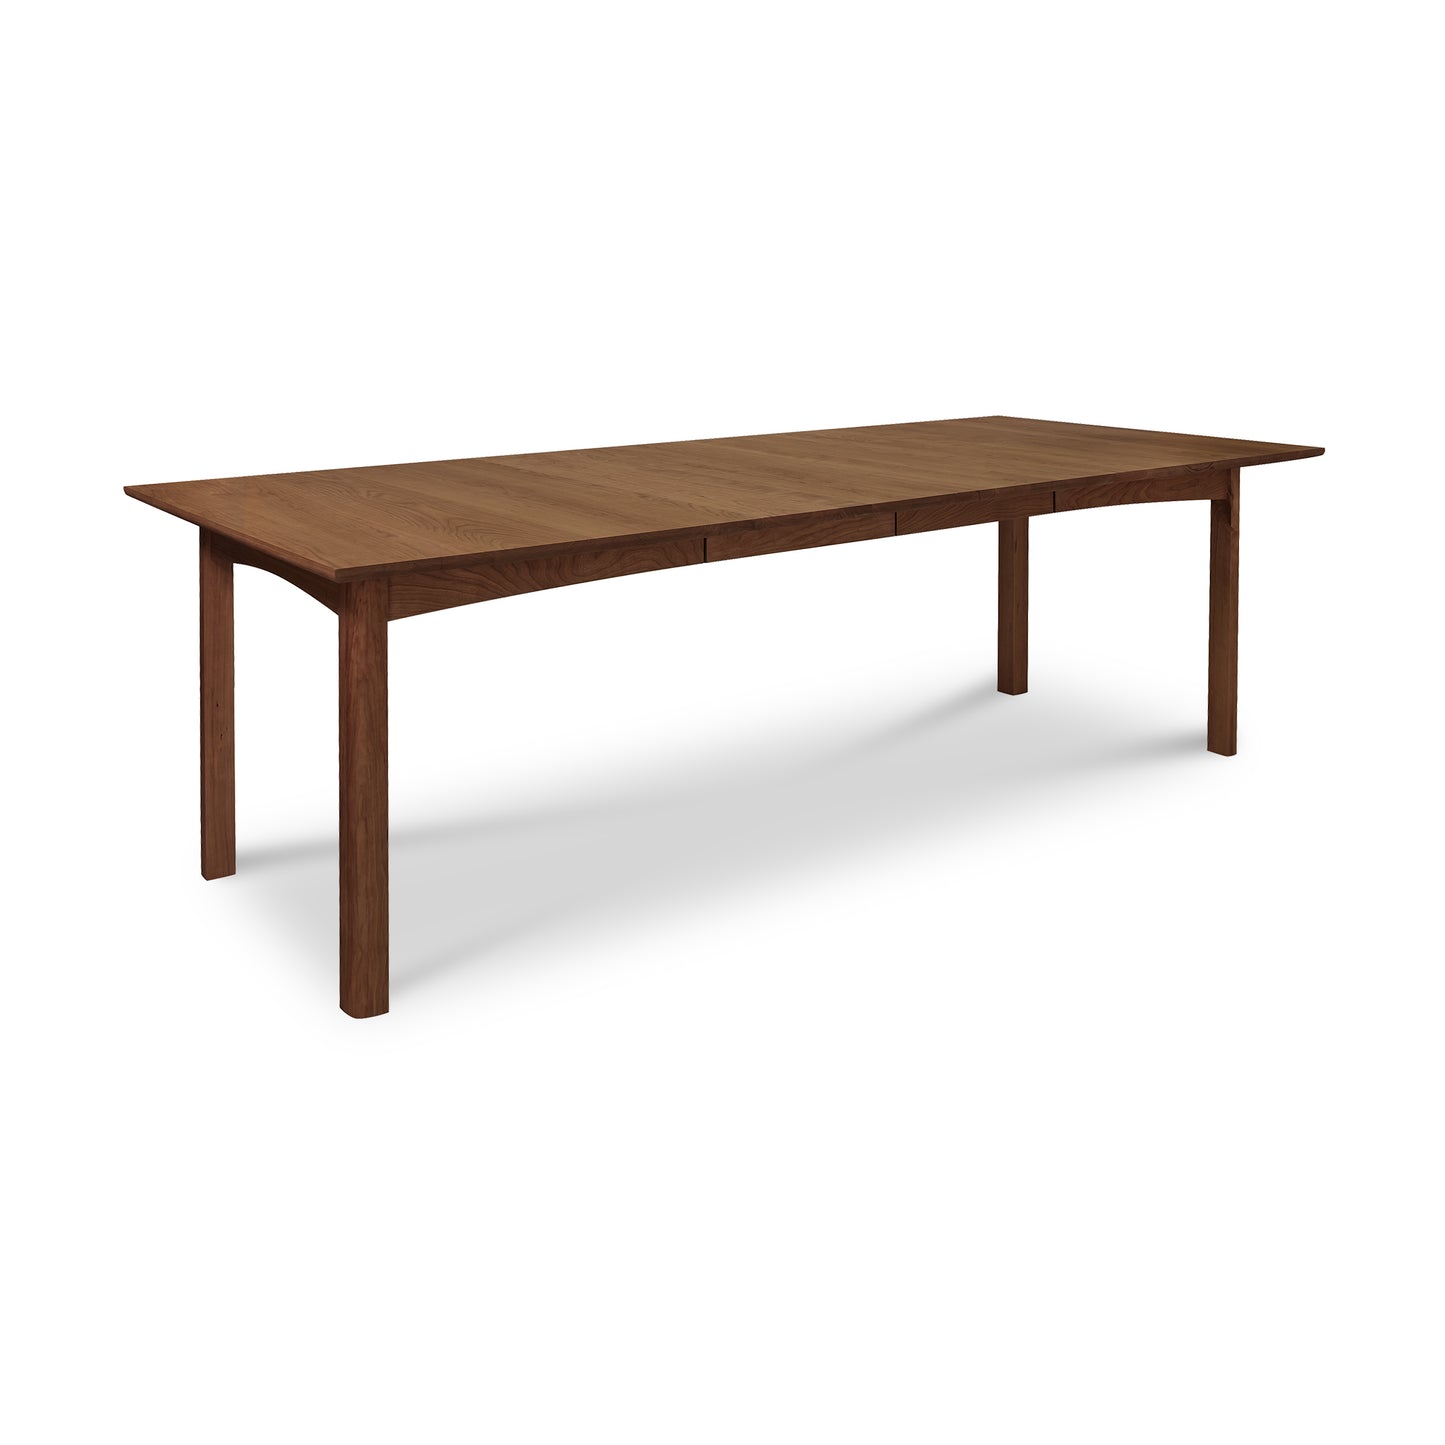 A Heartwood Shaker Extension Dining Table by Vermont Furniture Designs with a simple design and rectangular shape on a white background.